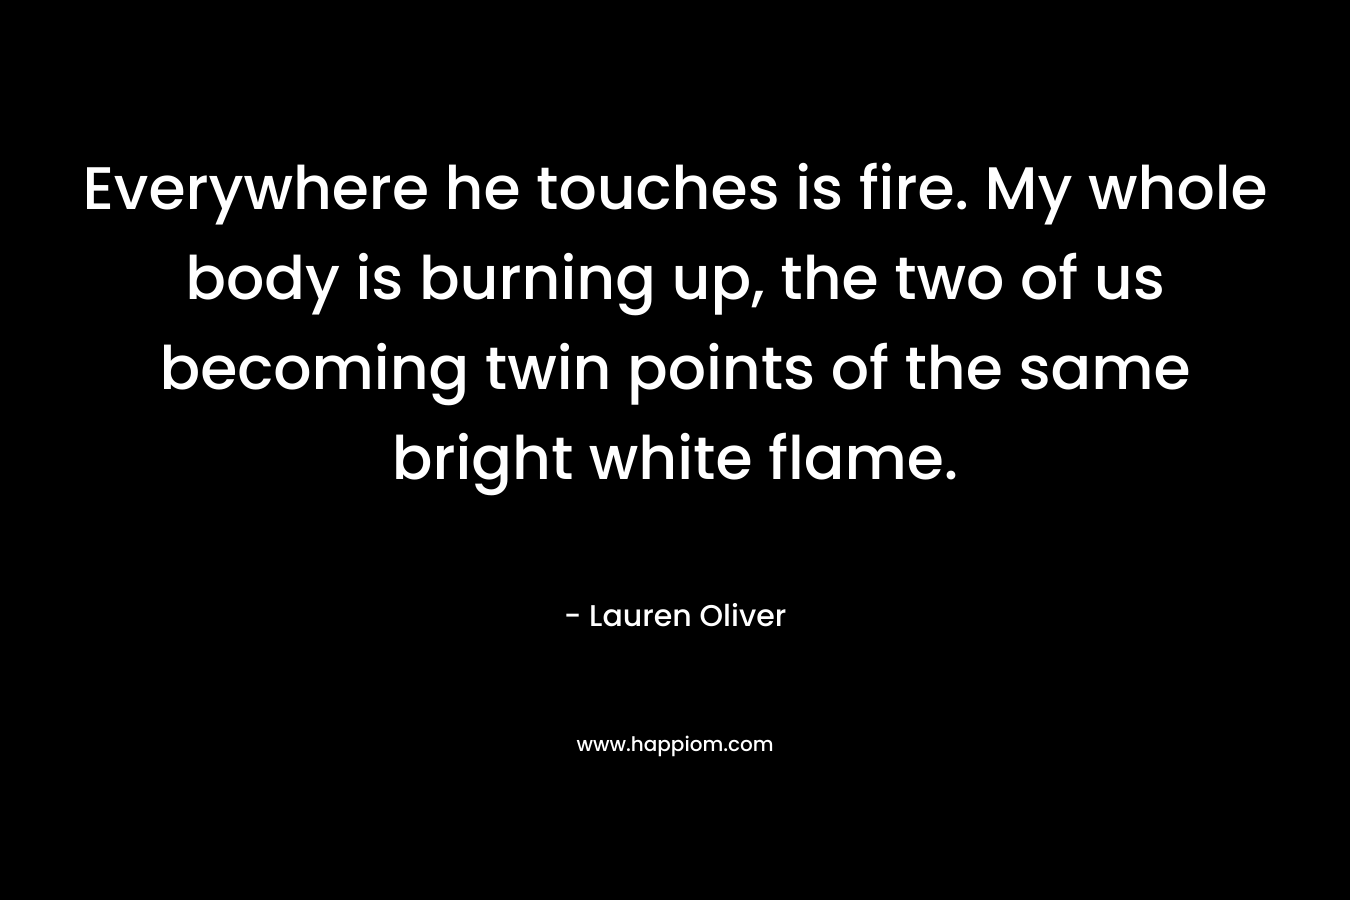 Everywhere he touches is fire. My whole body is burning up, the two of us becoming twin points of the same bright white flame.